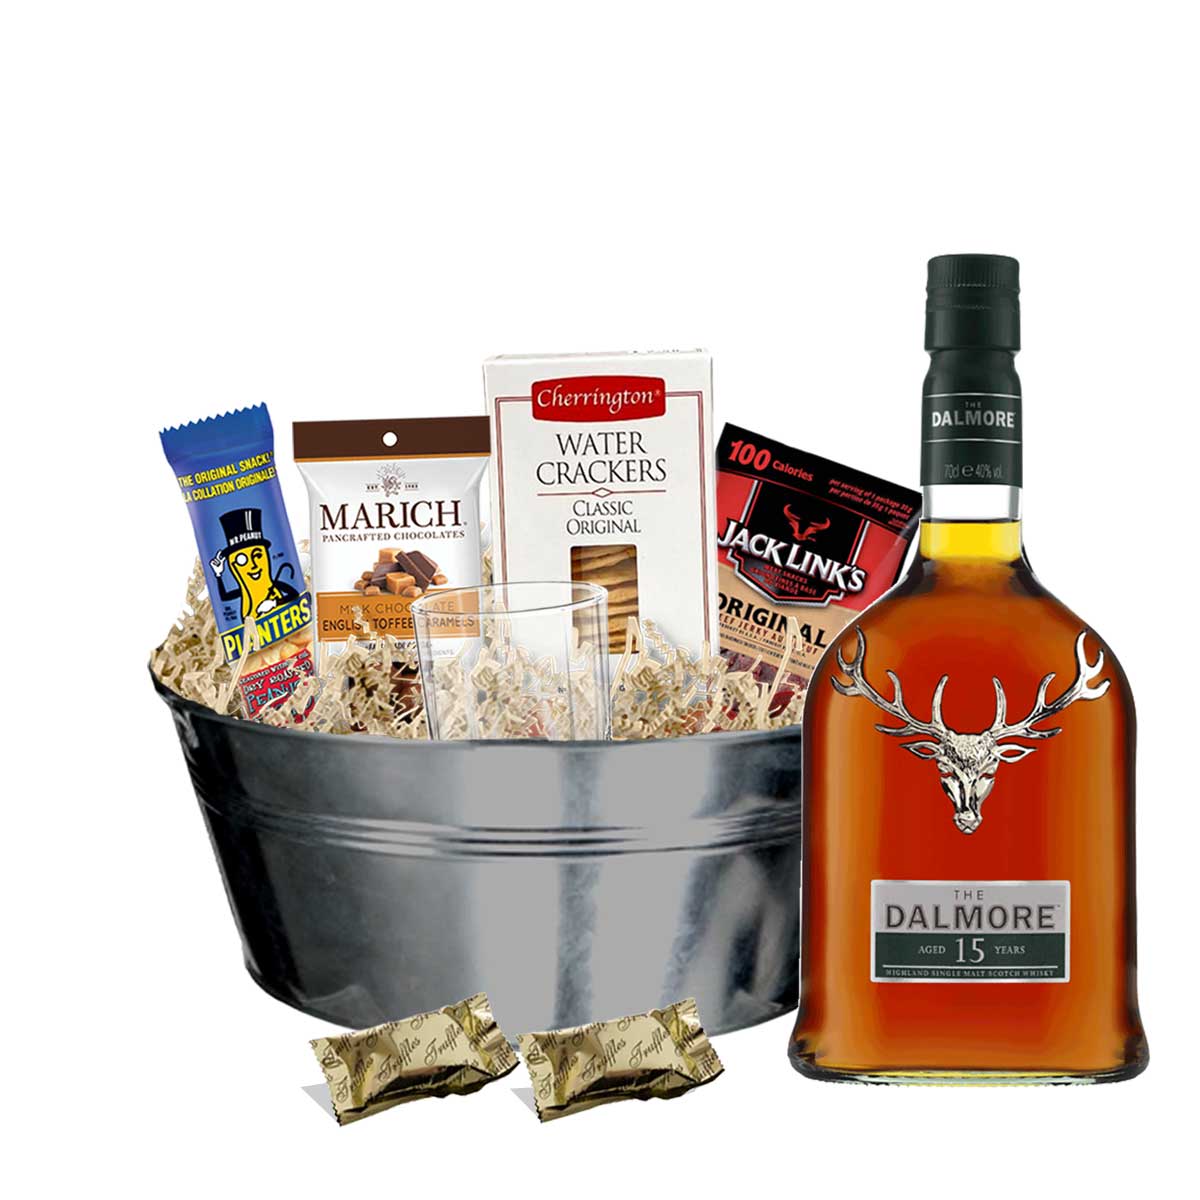 TAG Liquor Stores BC - Dalmore 15 Year Old Scotch Whisky 750ml Gift Basket